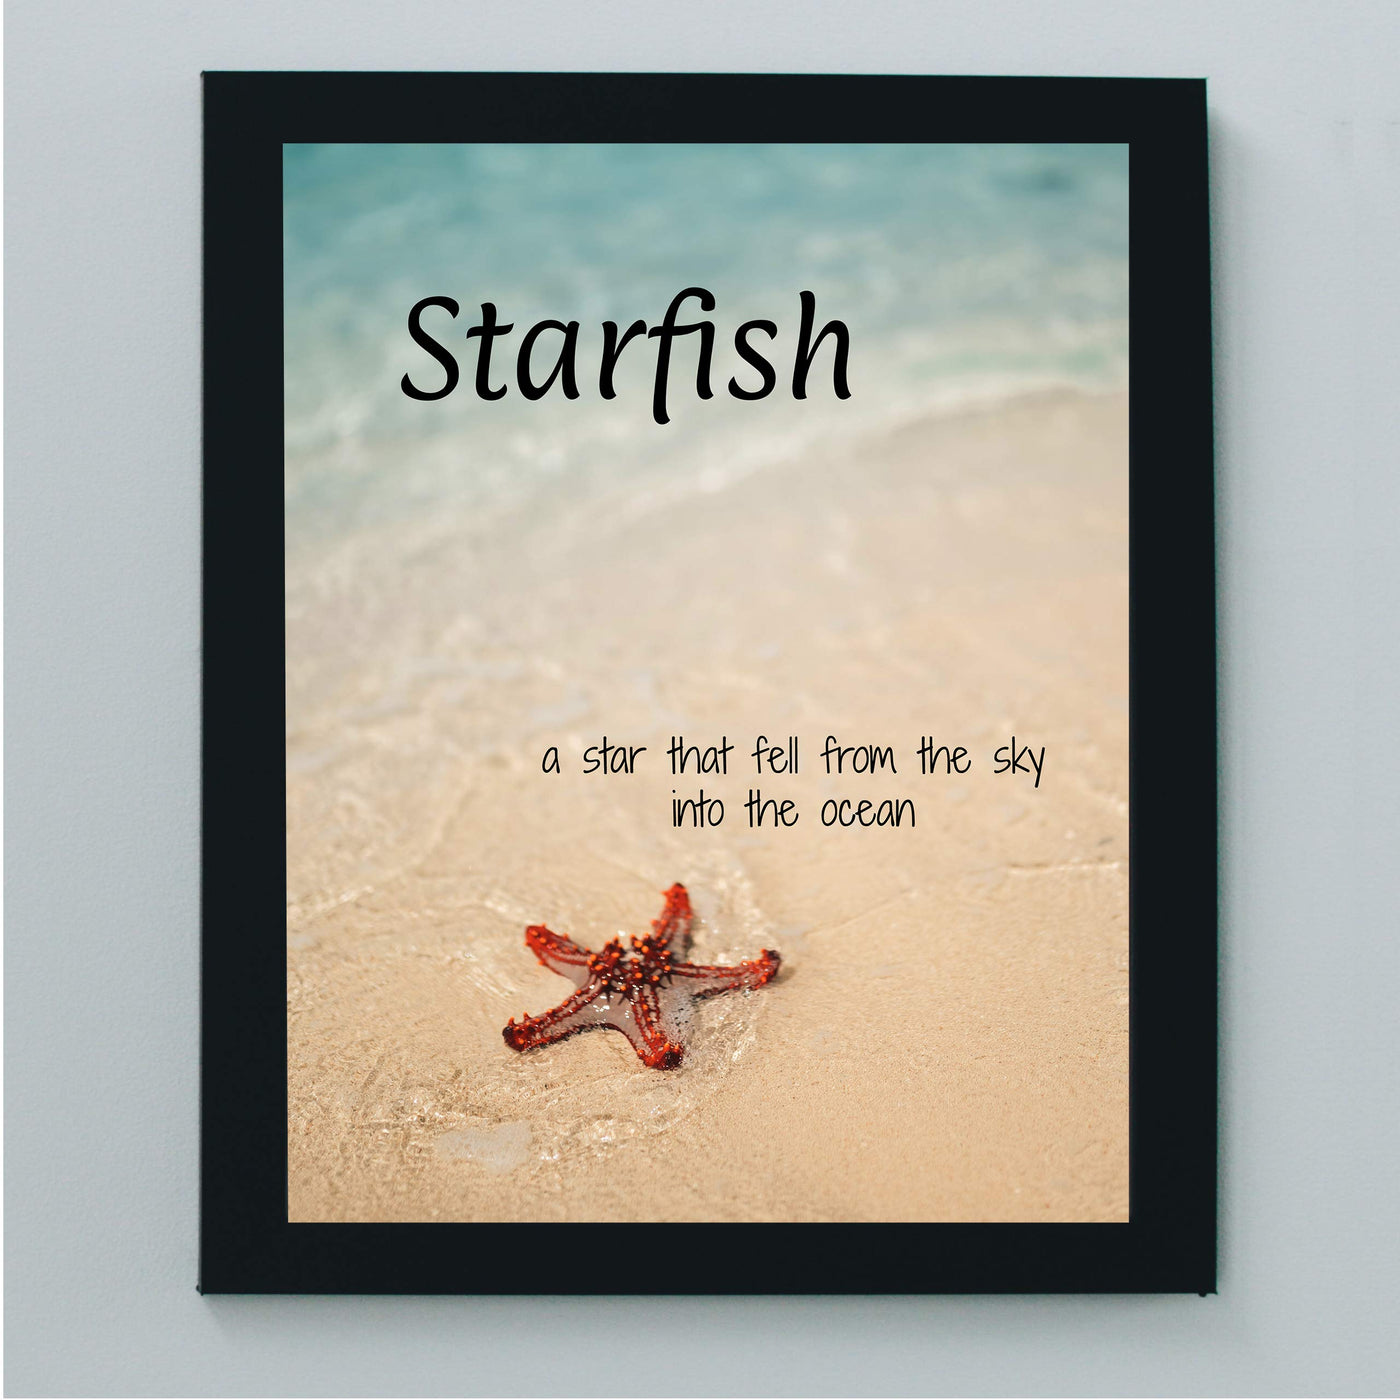 Starfish-Star That Fell From Sky Into the Ocean Inspirational Beach Wall Art Sign -8 x 10" Nautical Wall Print-Ready to Frame. Home-Office-Beach House Decor. Perfect Beach Themed Decoration!